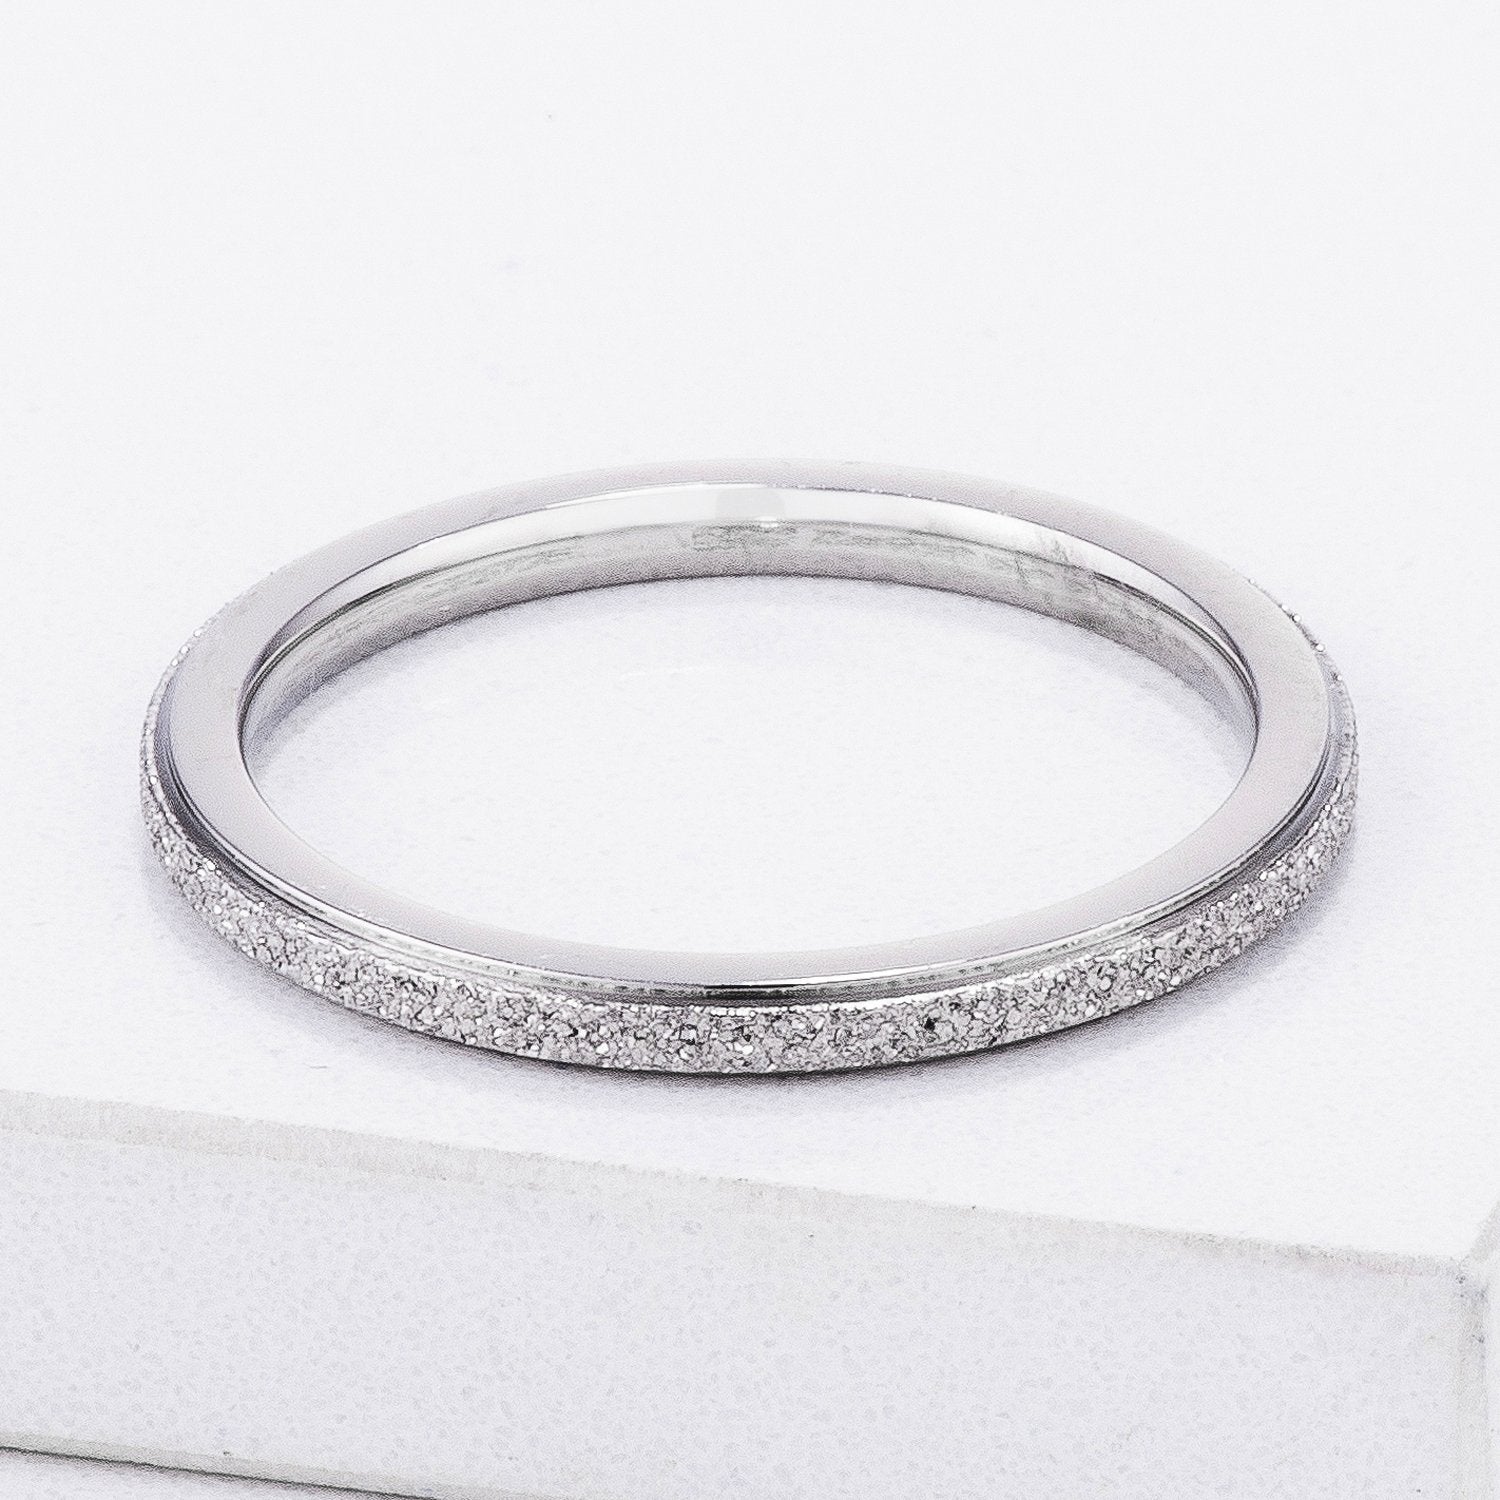 Diamond Cut Stainless Steel Stackable Ring freeshipping - Higher Class Elegance